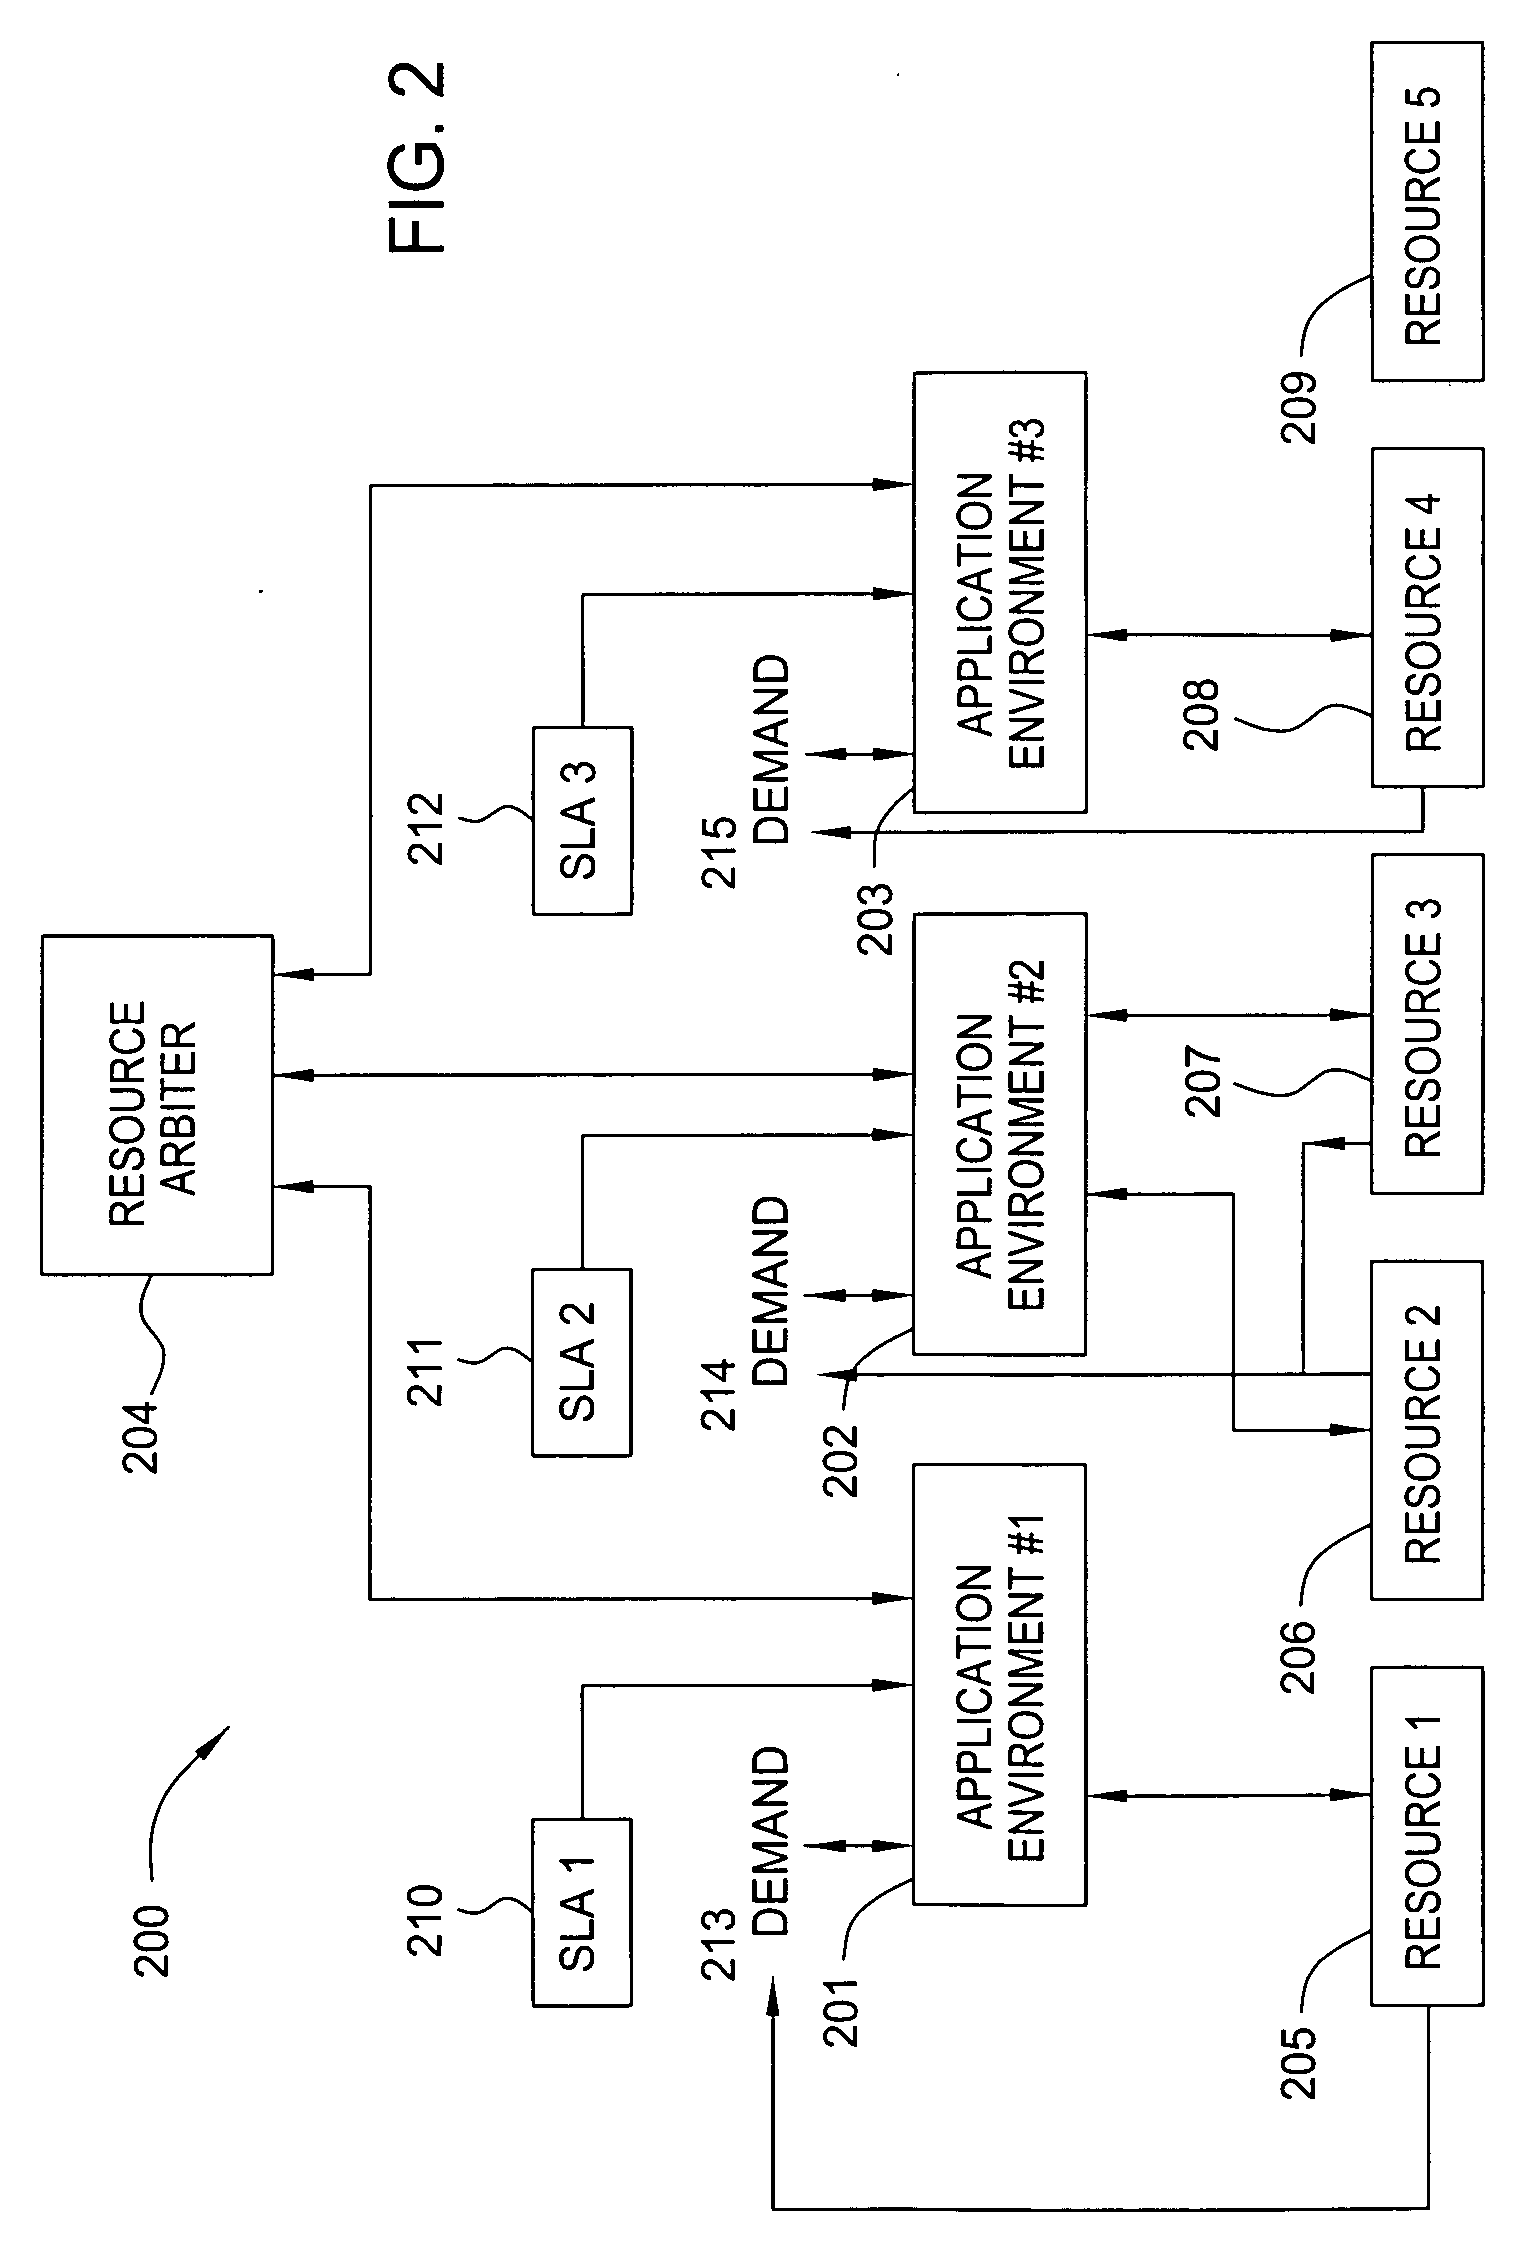 Method and apparatus for utility-based dynamic resource allocation in a distributed computing system